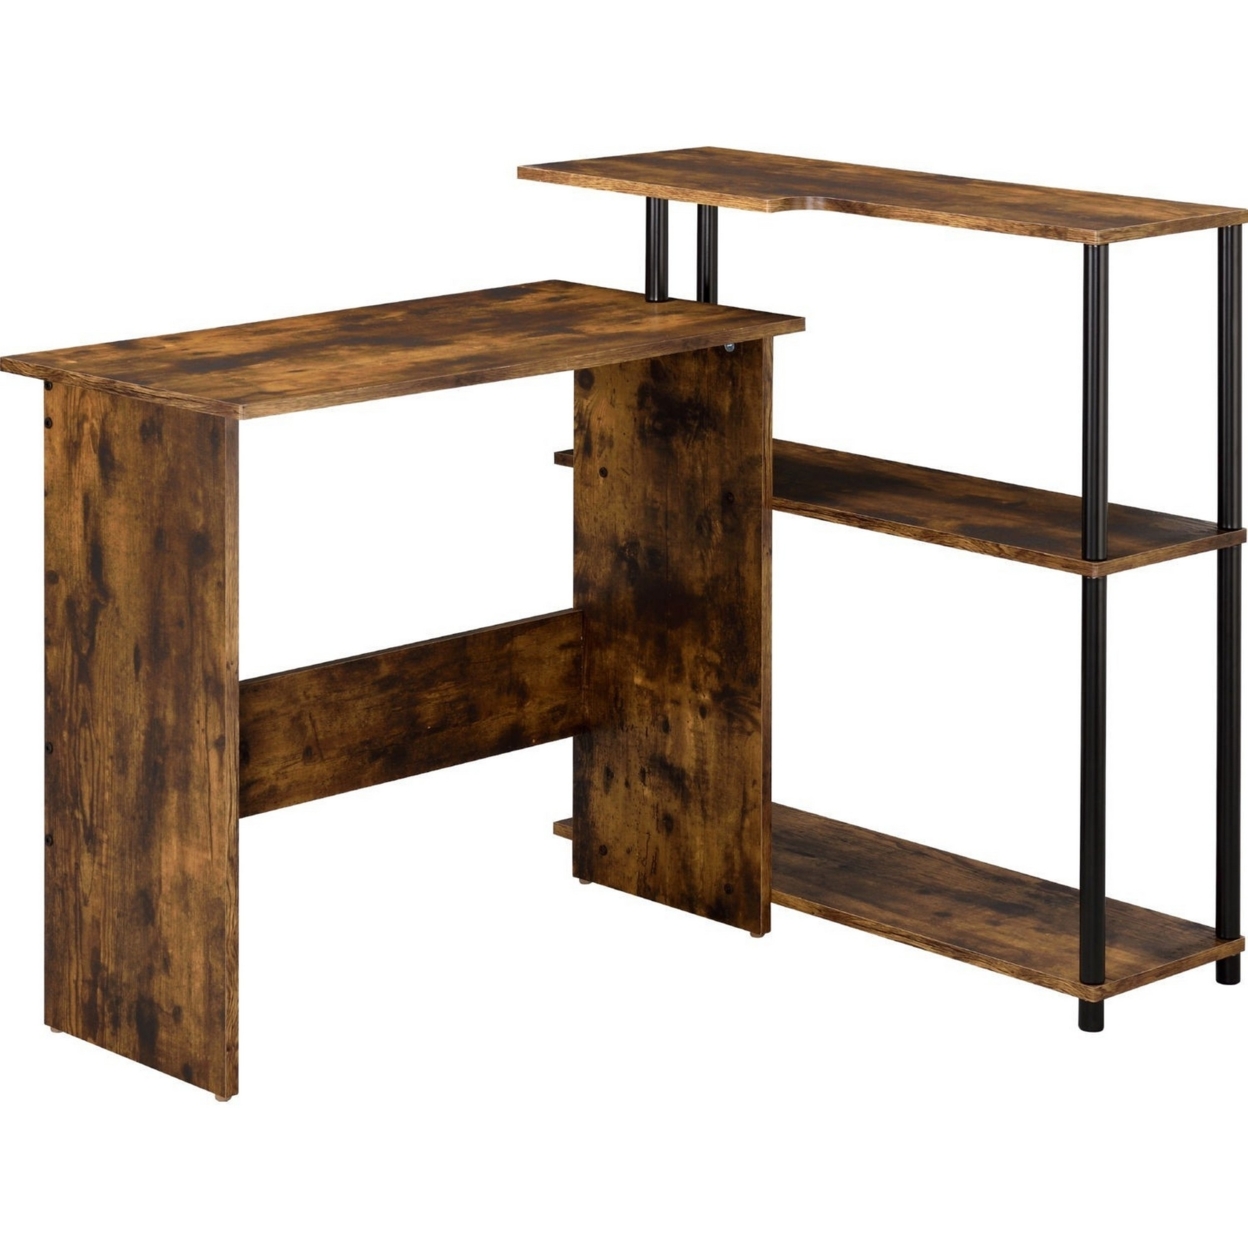 Writing Desk With L Shaped Design And Rough Hewn Saw Texture, Brown- Saltoro Sherpi